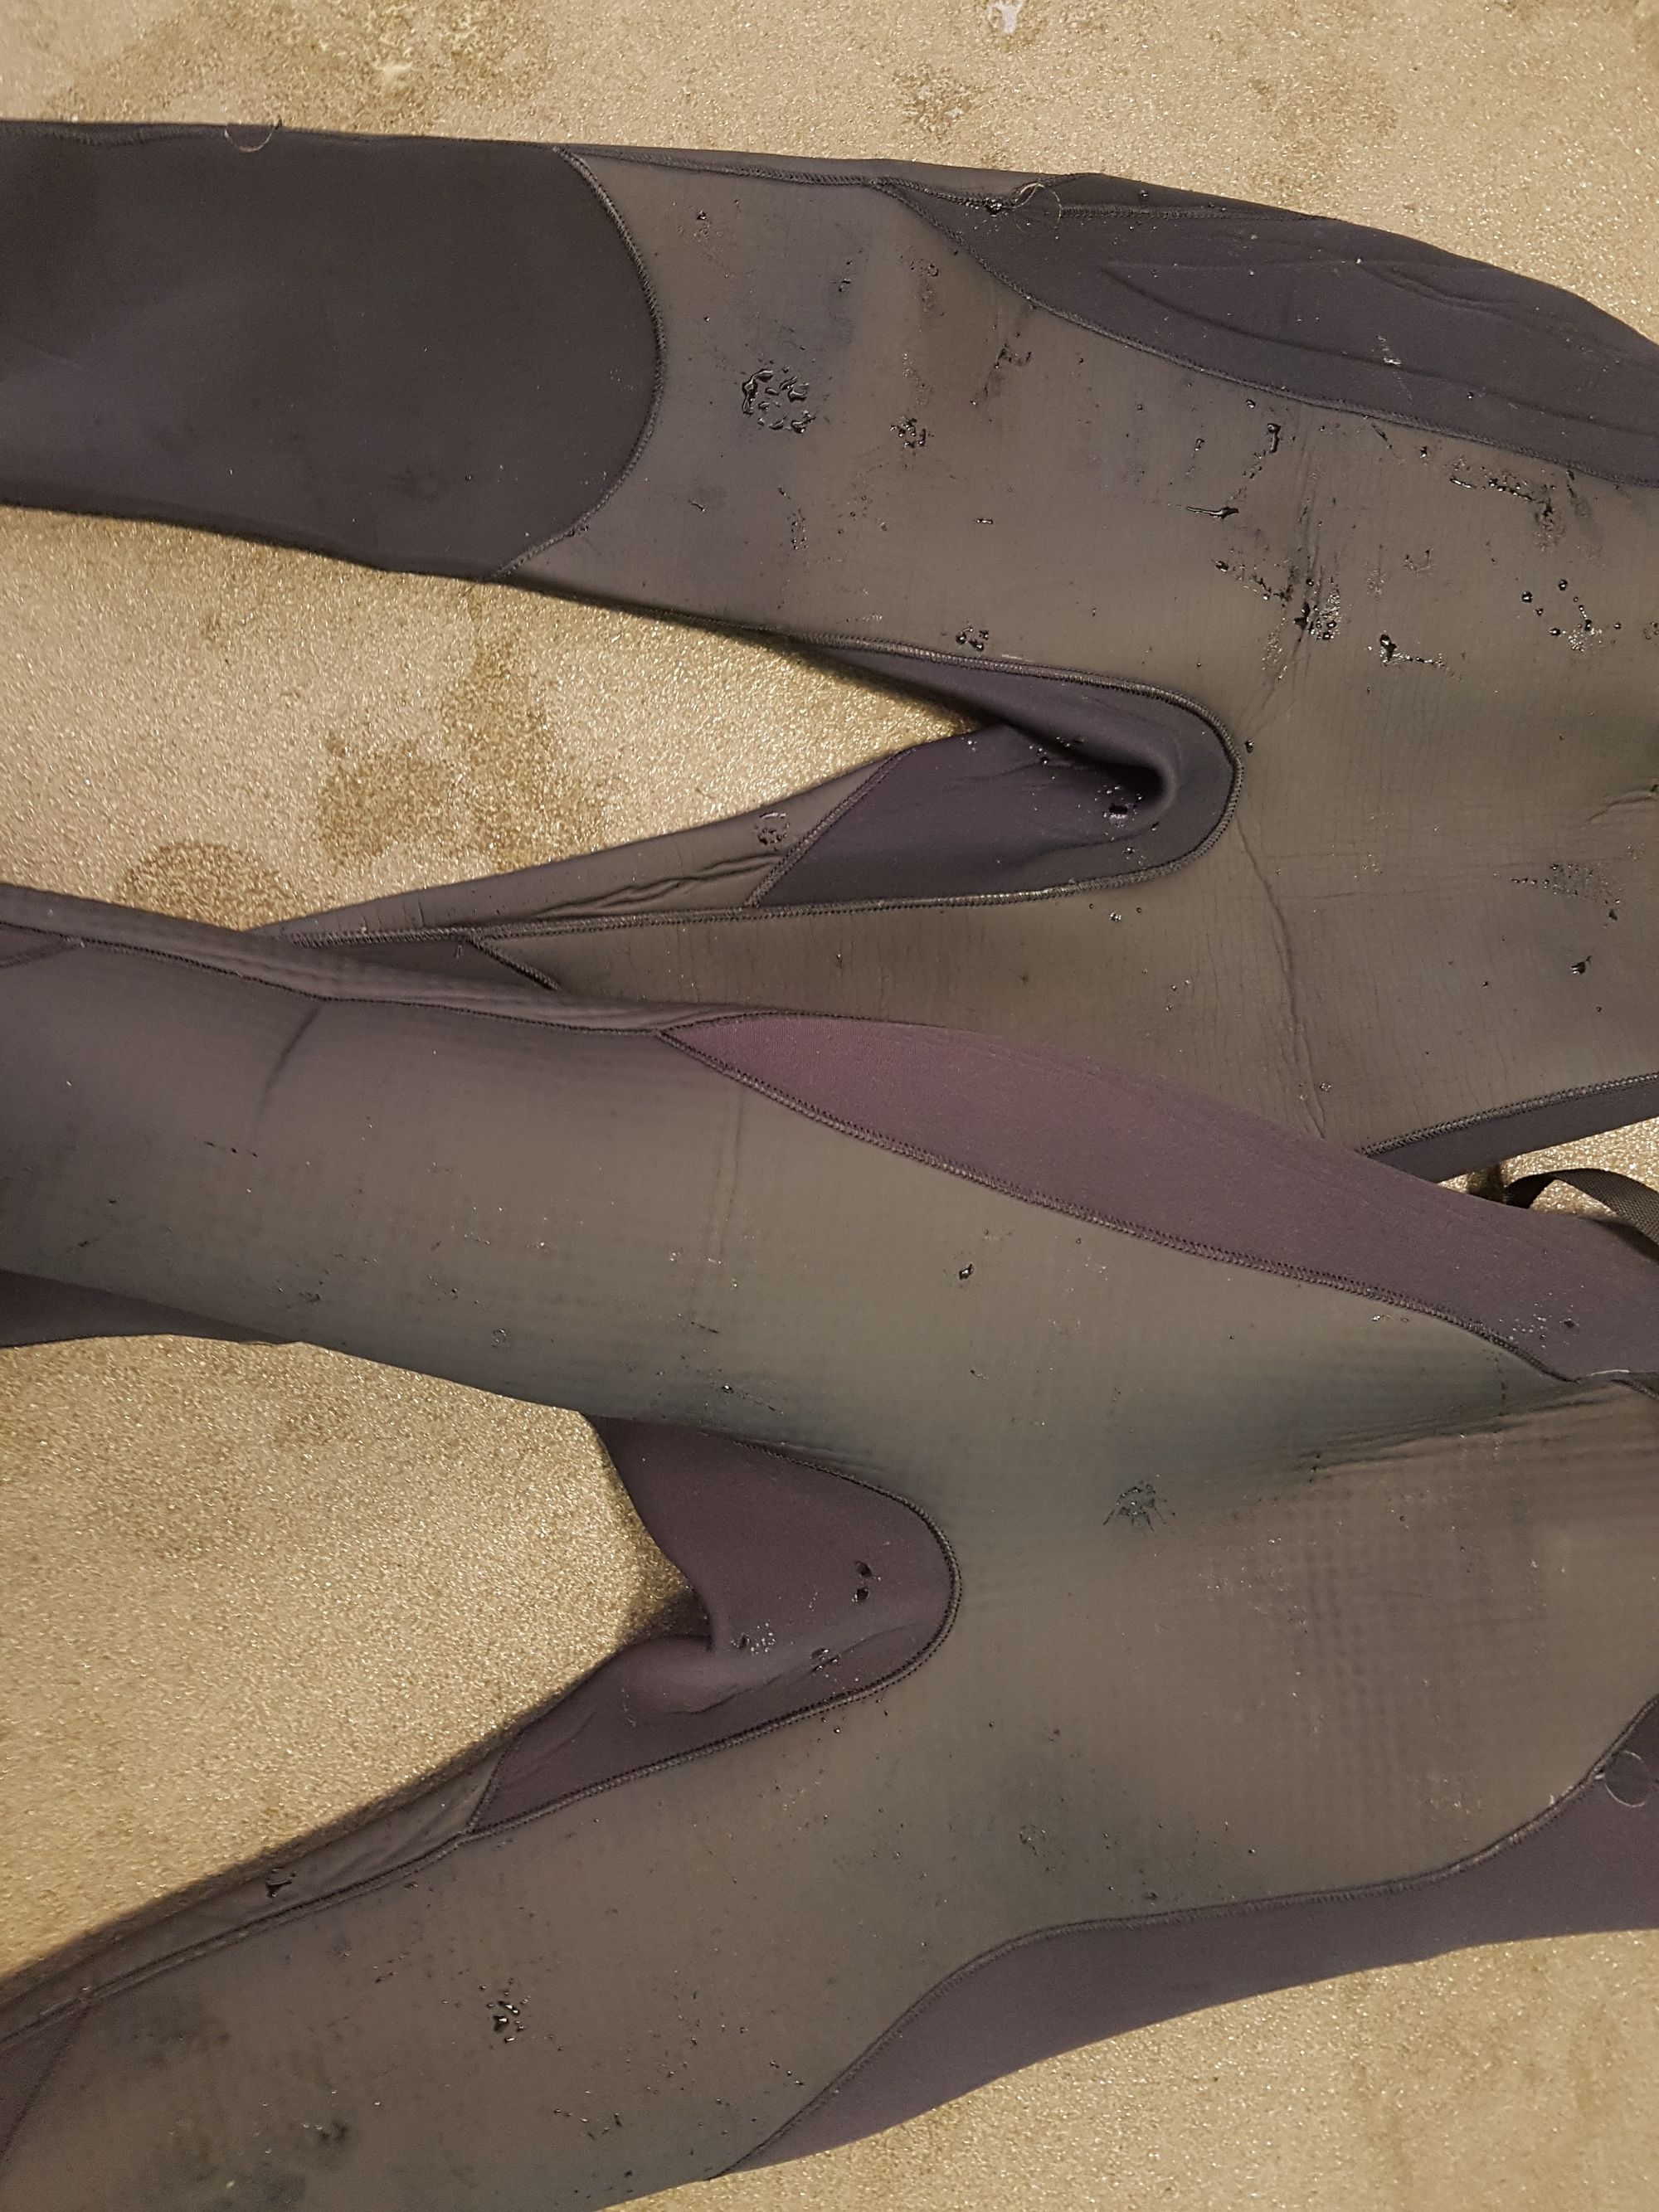 Image of the updated 2017 Orca Predator wetsuit